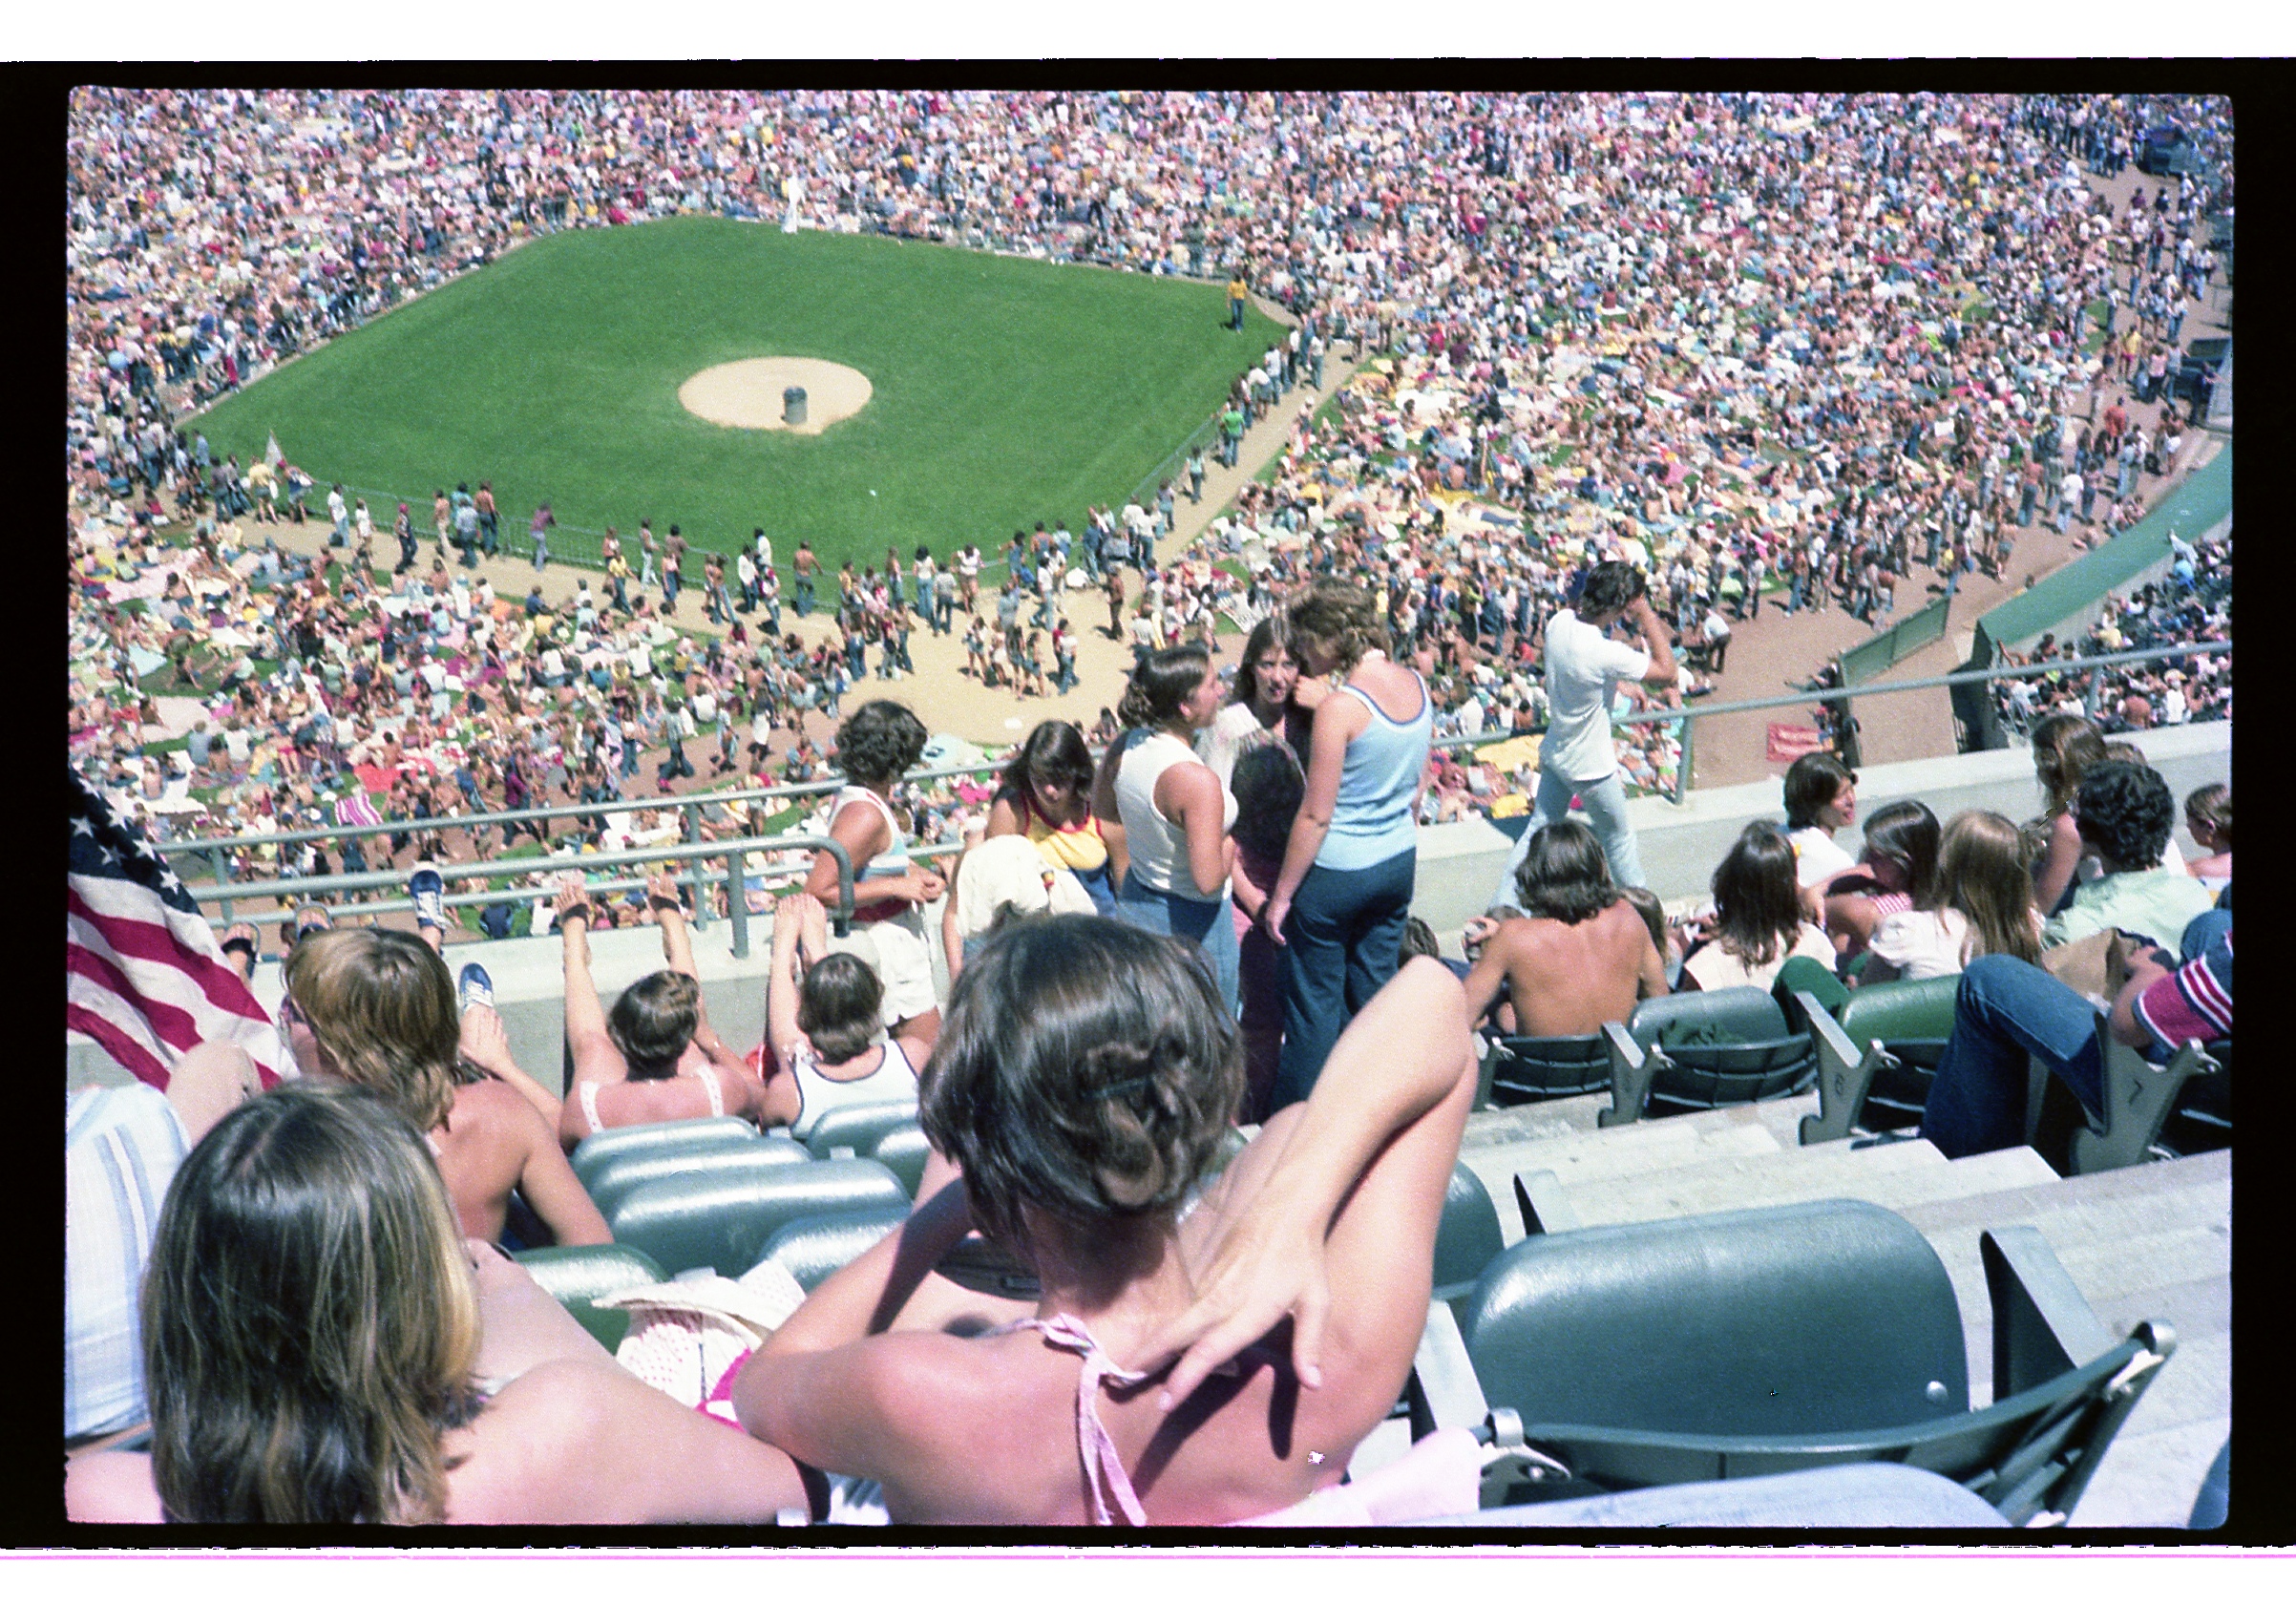 Day On The Green(Concerts) Oakland, California July 1976 (Fairfield